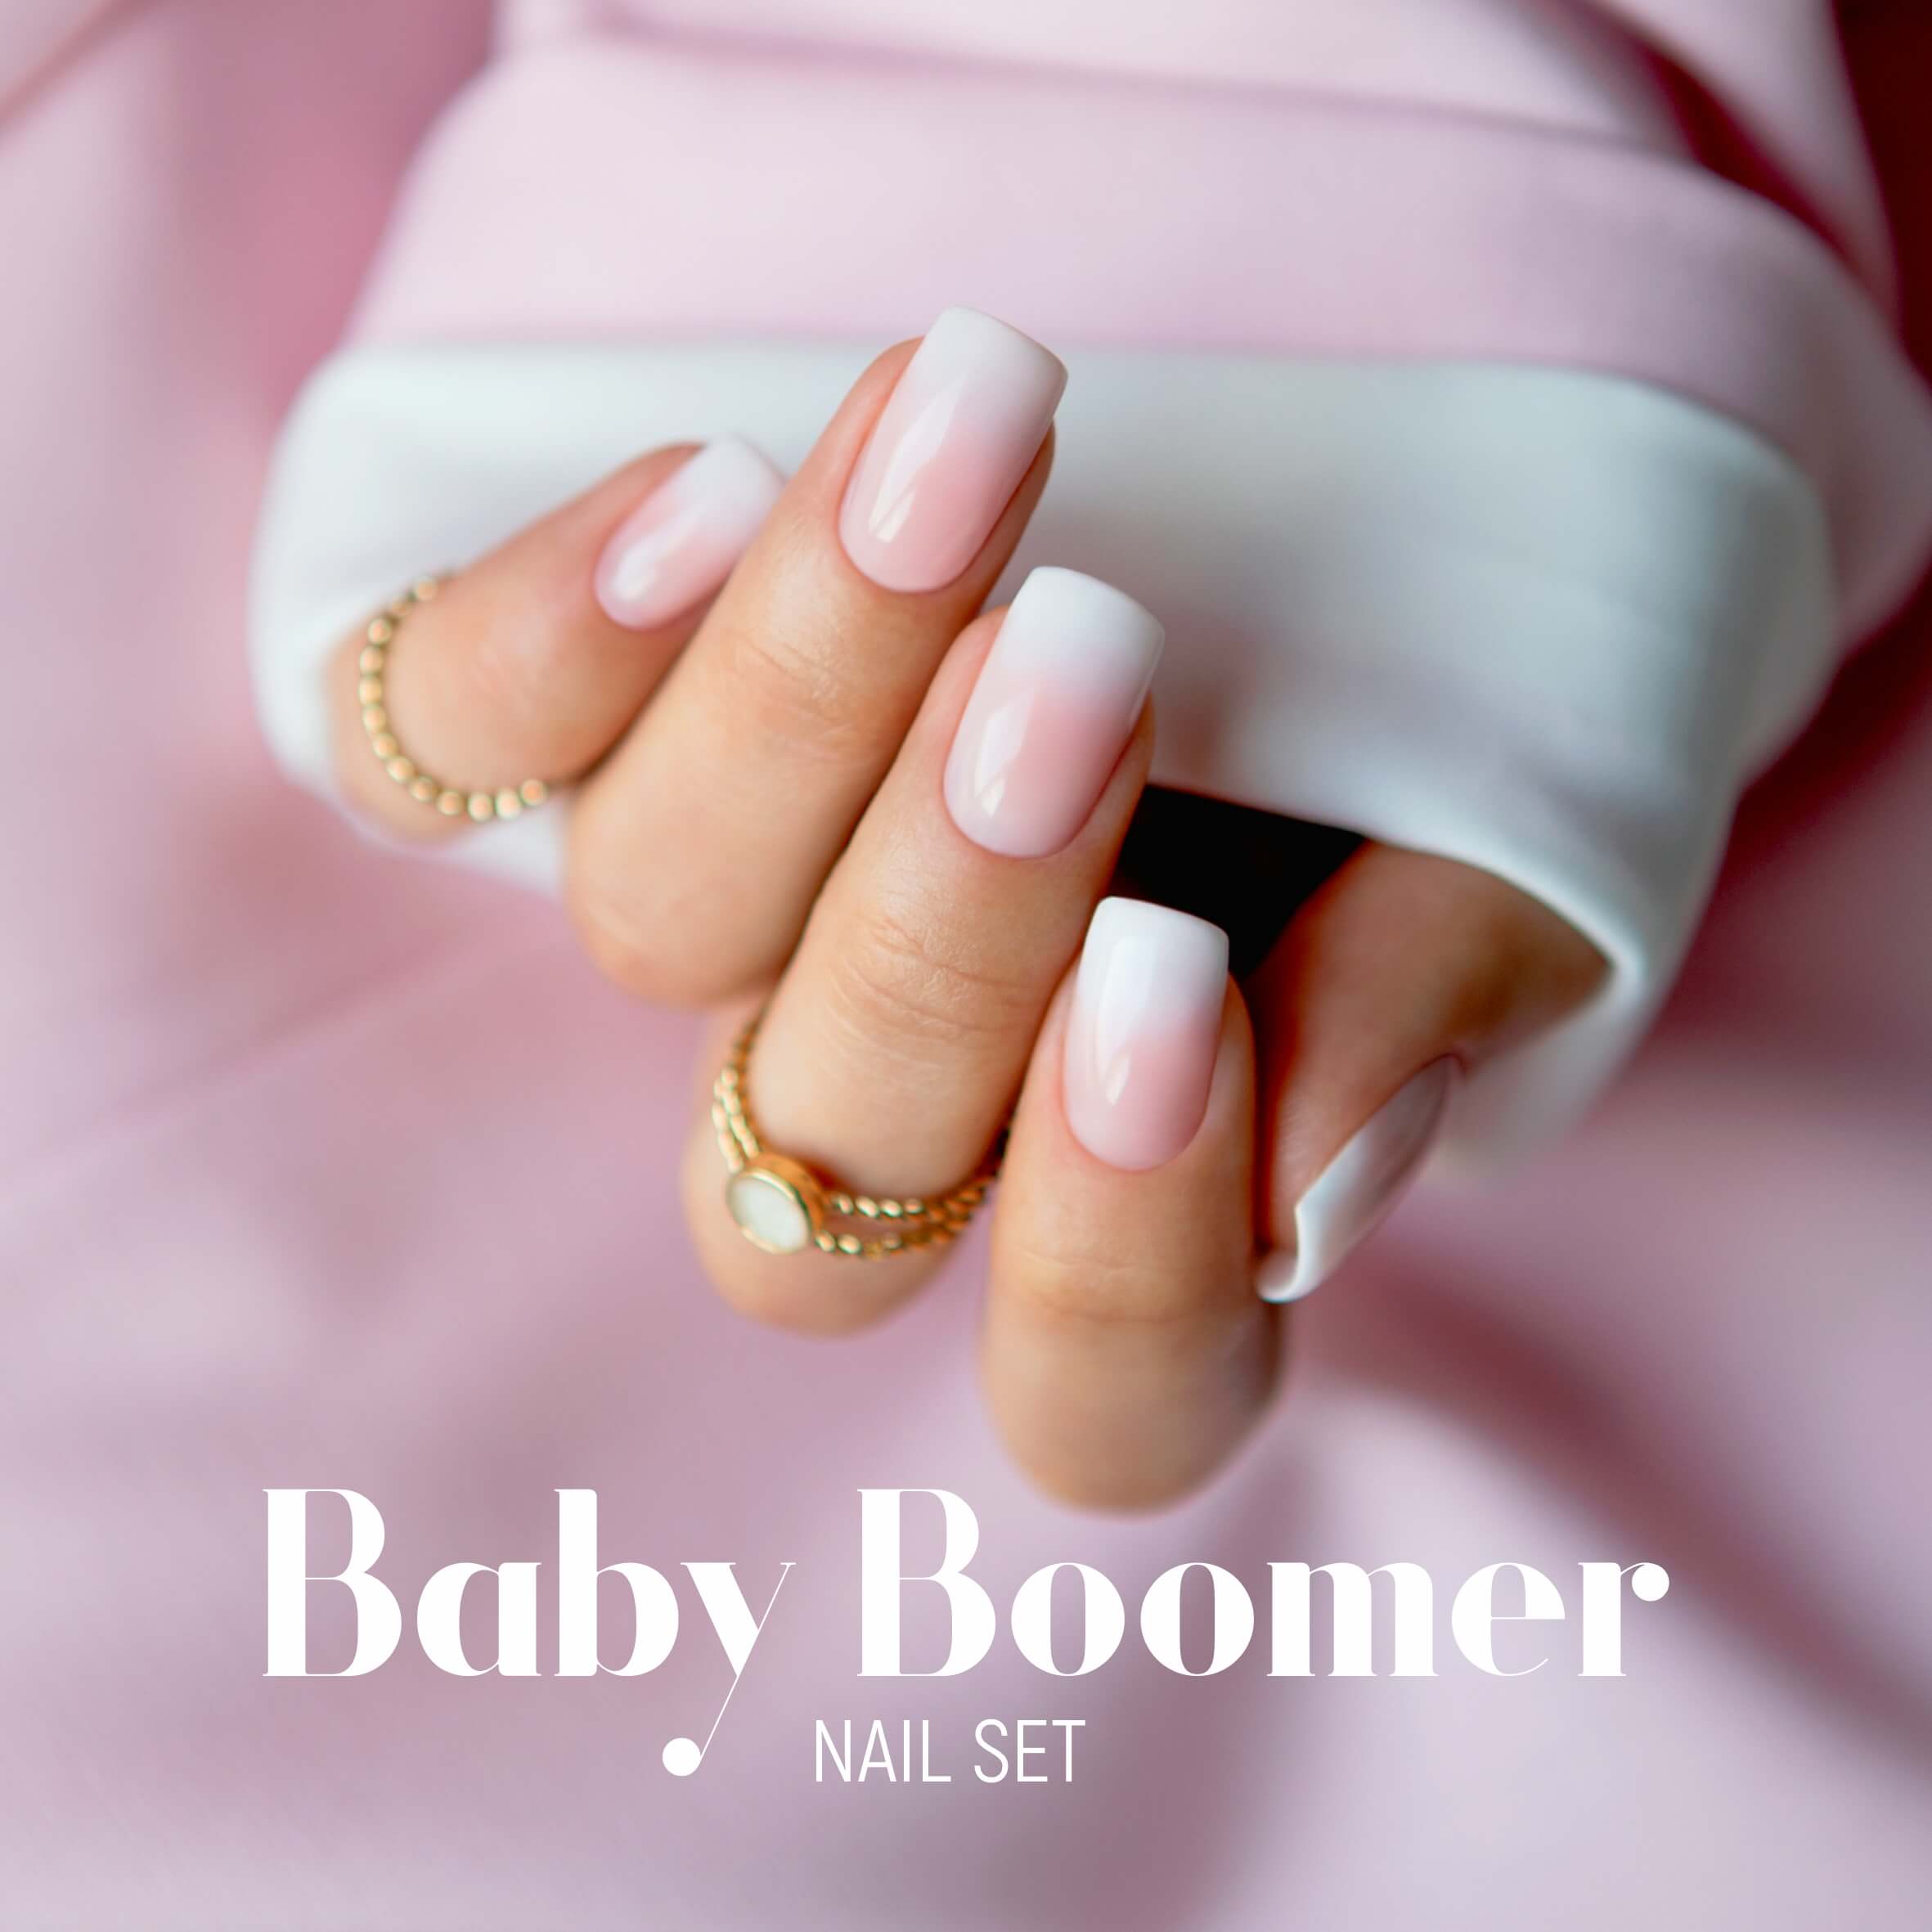 Baby Boomer' Nails Are The Classic Look Making An Epic Comeback